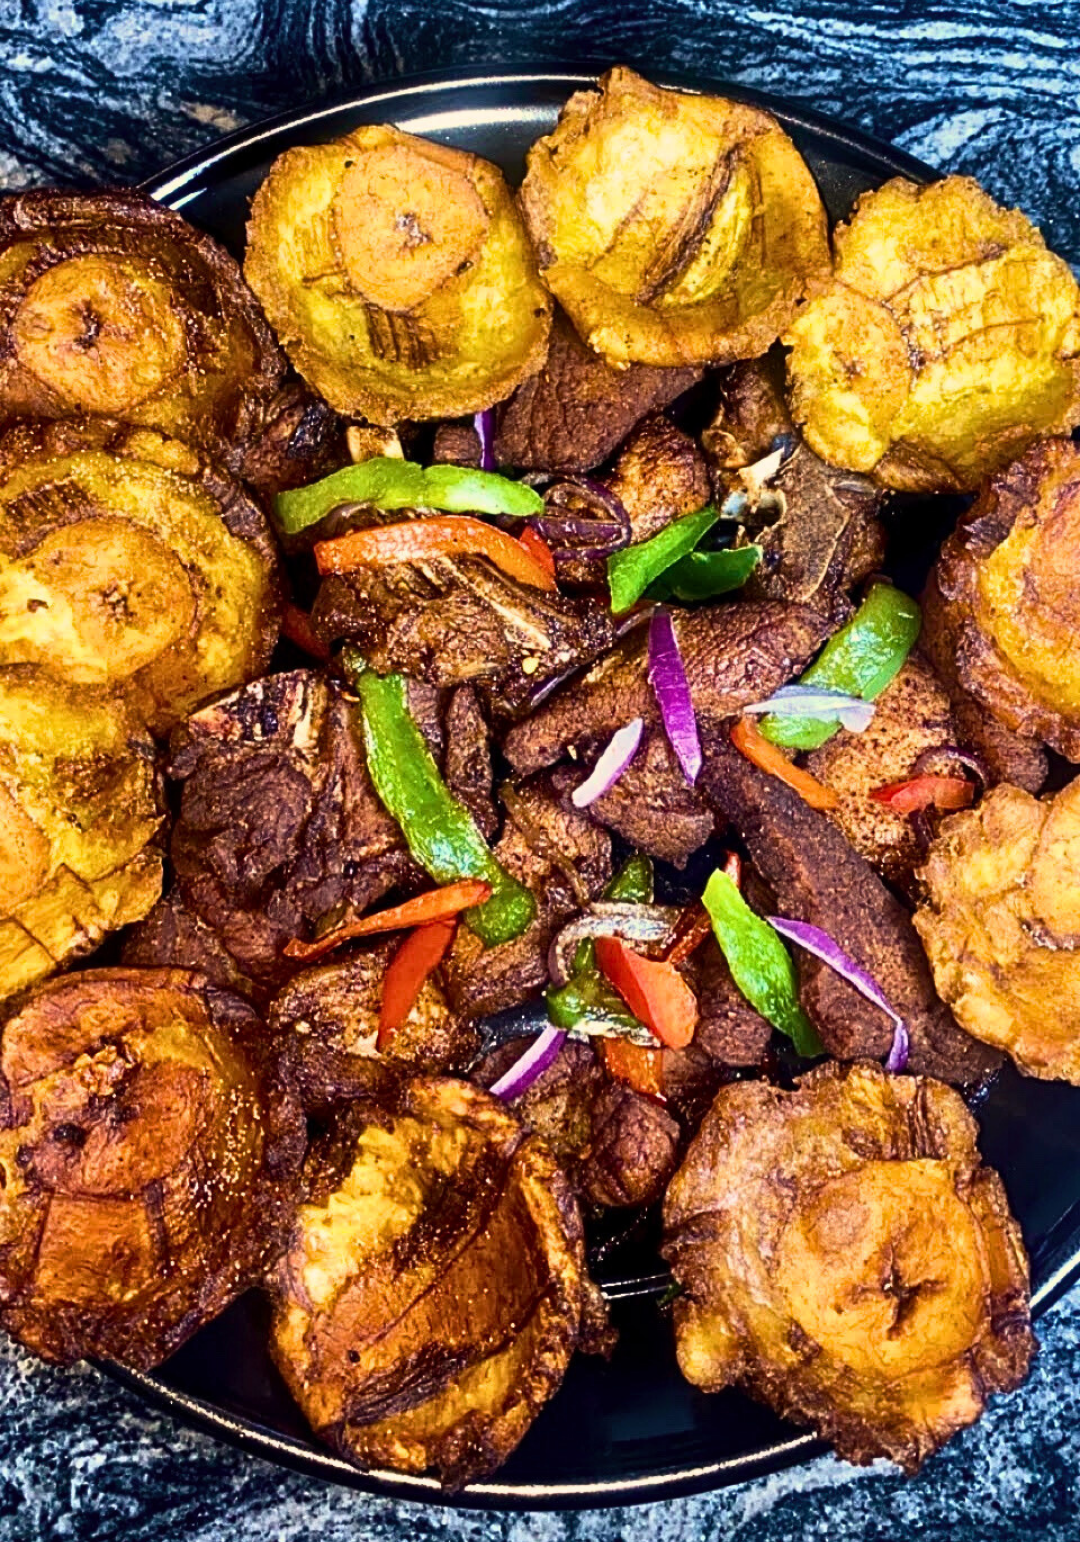 Good Eats and Epis- Fried Plantain Recipe Griot Recipe